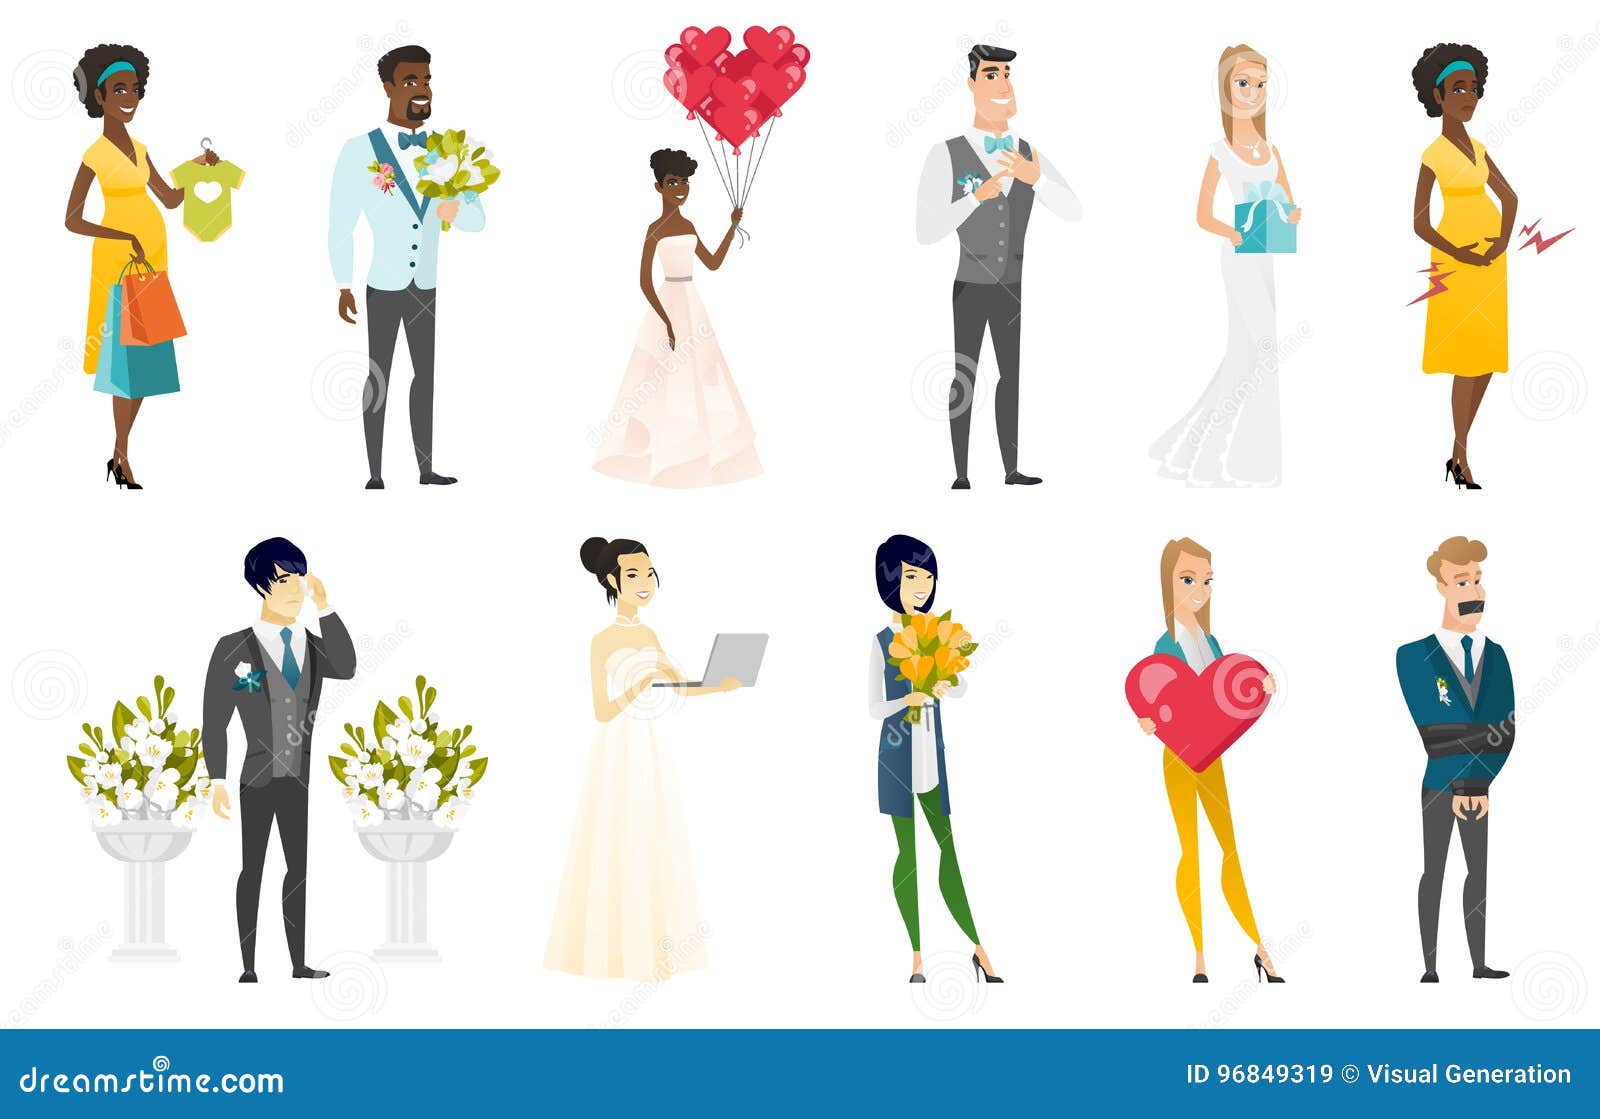 Bride And Groom Vector Illustrations Set Stock Vector